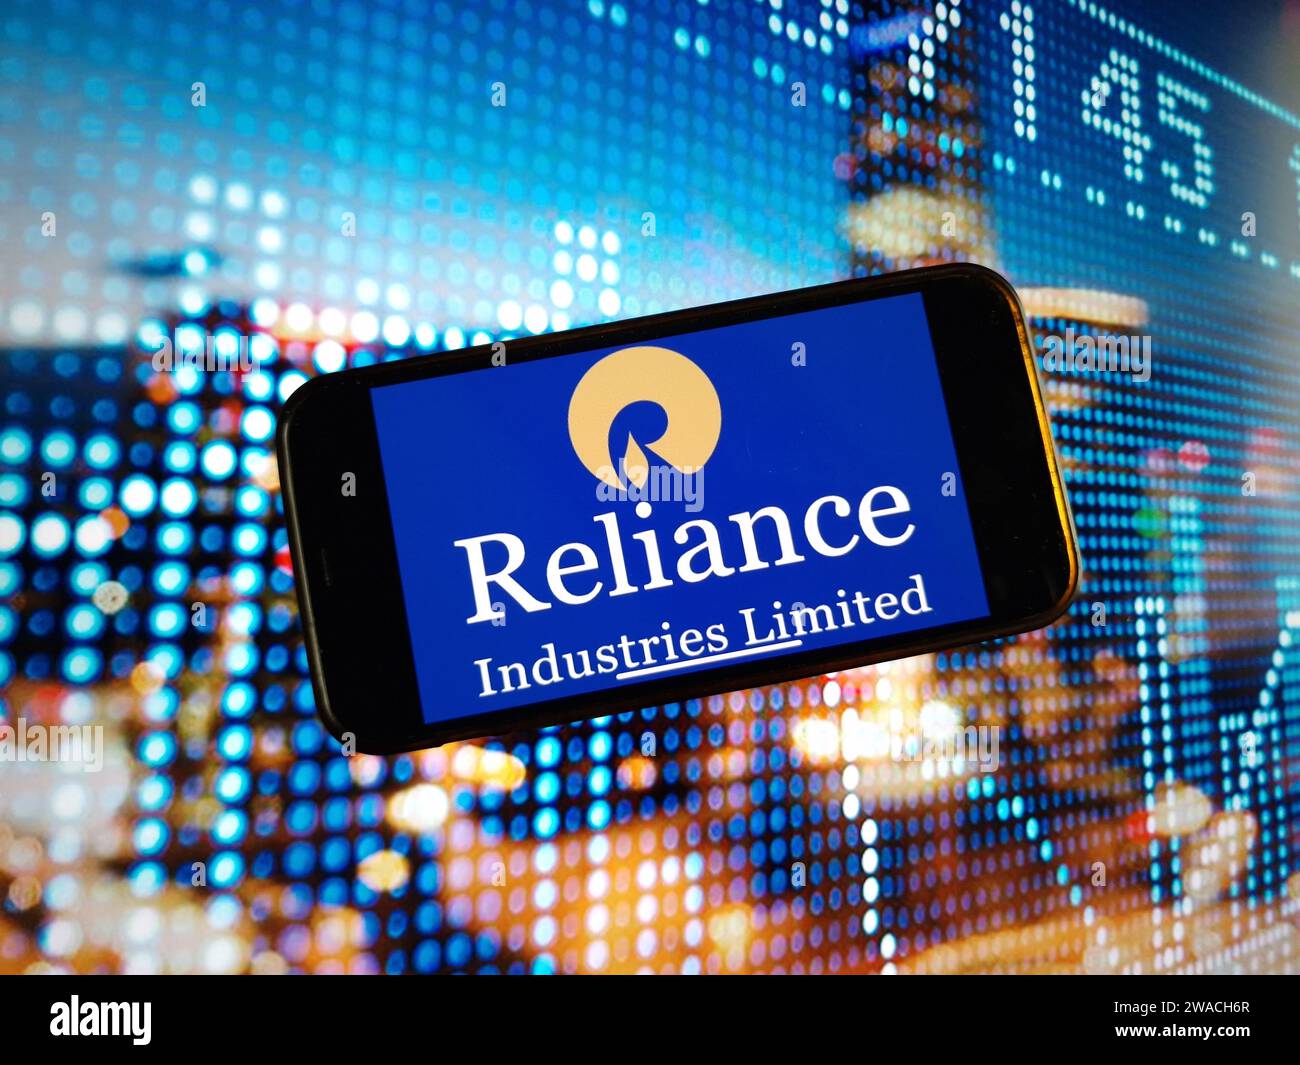 Konskie, Poland - January 03, 2024: Reliance Industries Limited company logo displayed on mobile phone screen Stock Photo